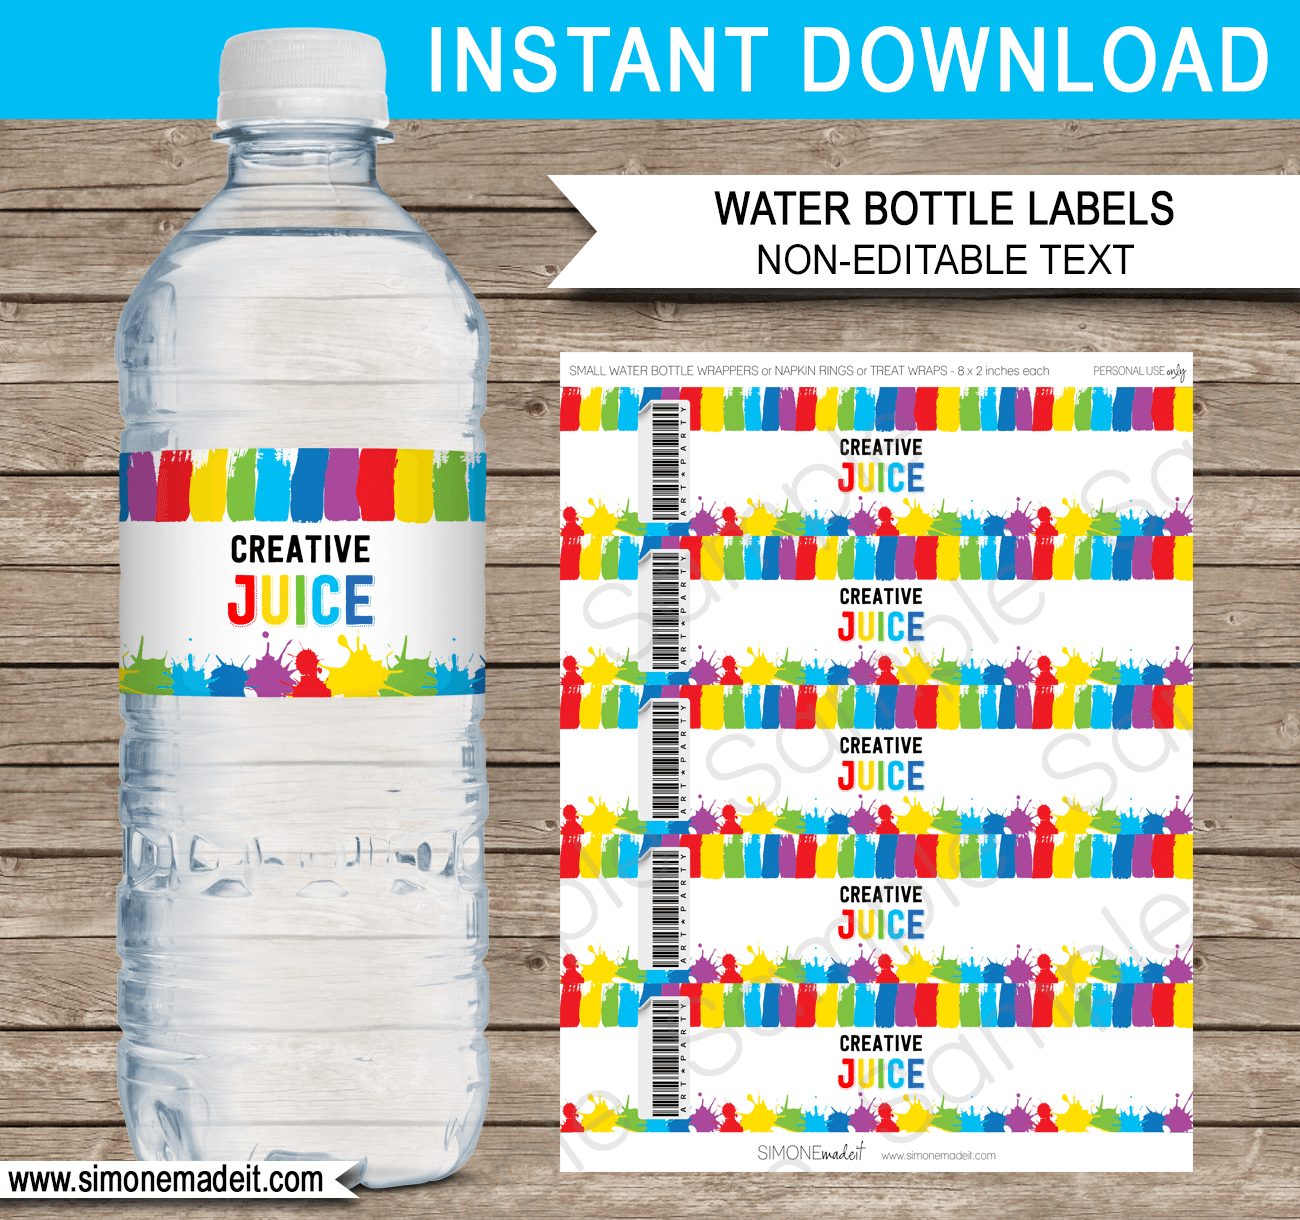 Art Party Water Bottle Labels Template | Creative Juice | Paint or Art Birthday Party | DIY Editable & Printable Template | $3.00 INSTANT DOWNLOAD via SIMONEmadeit.com